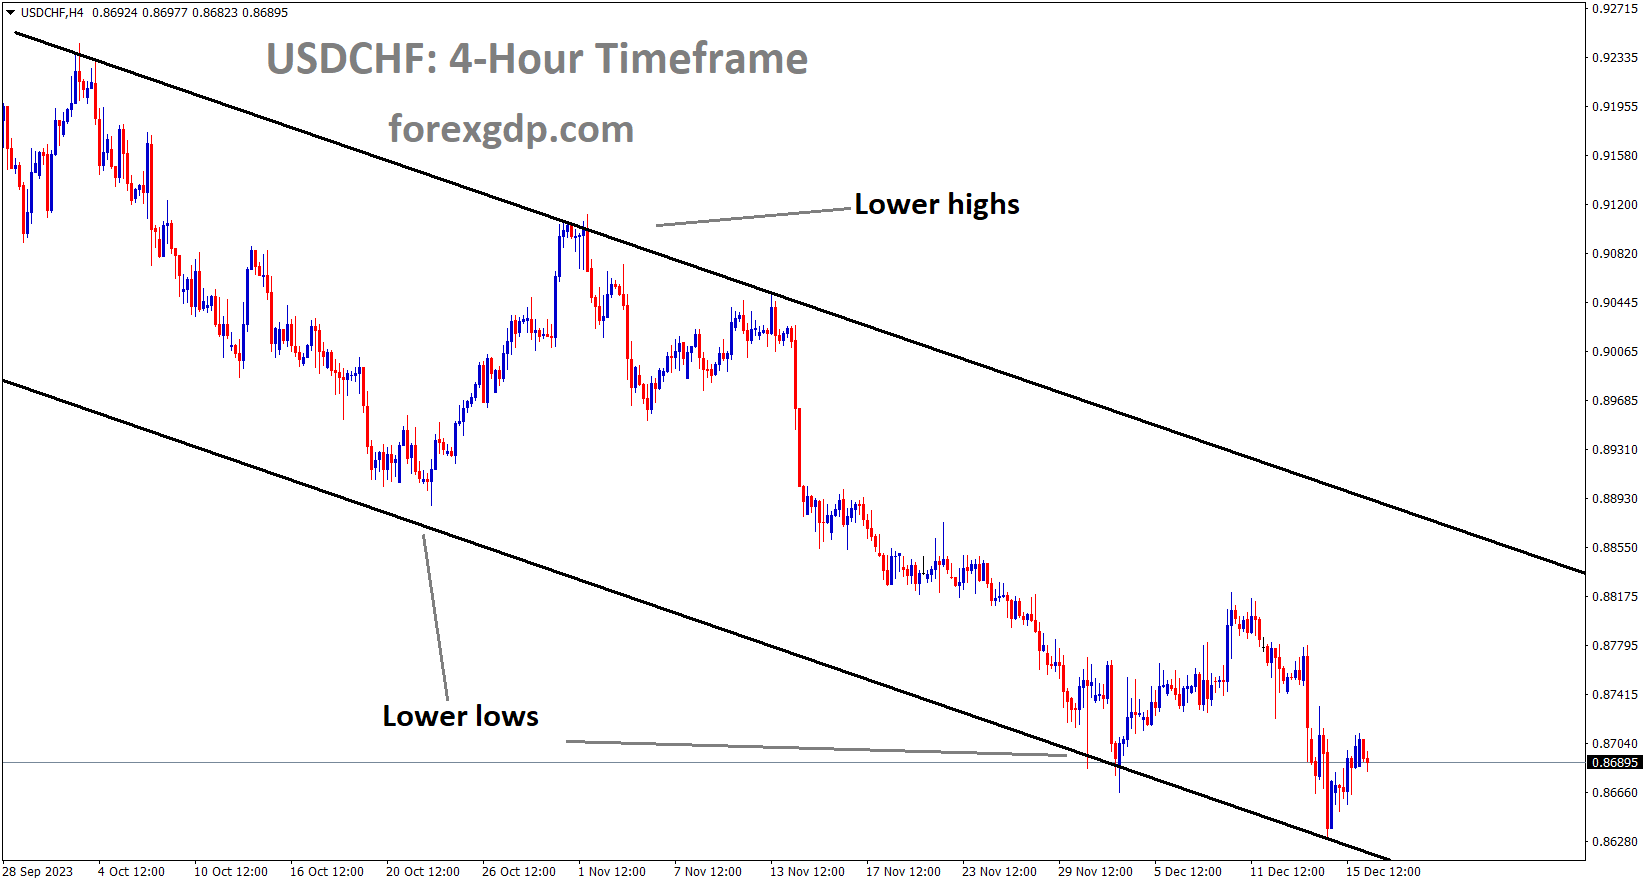 USDCHF is moving in the Descending channel and the market has rebounded from the lower low area of the channel